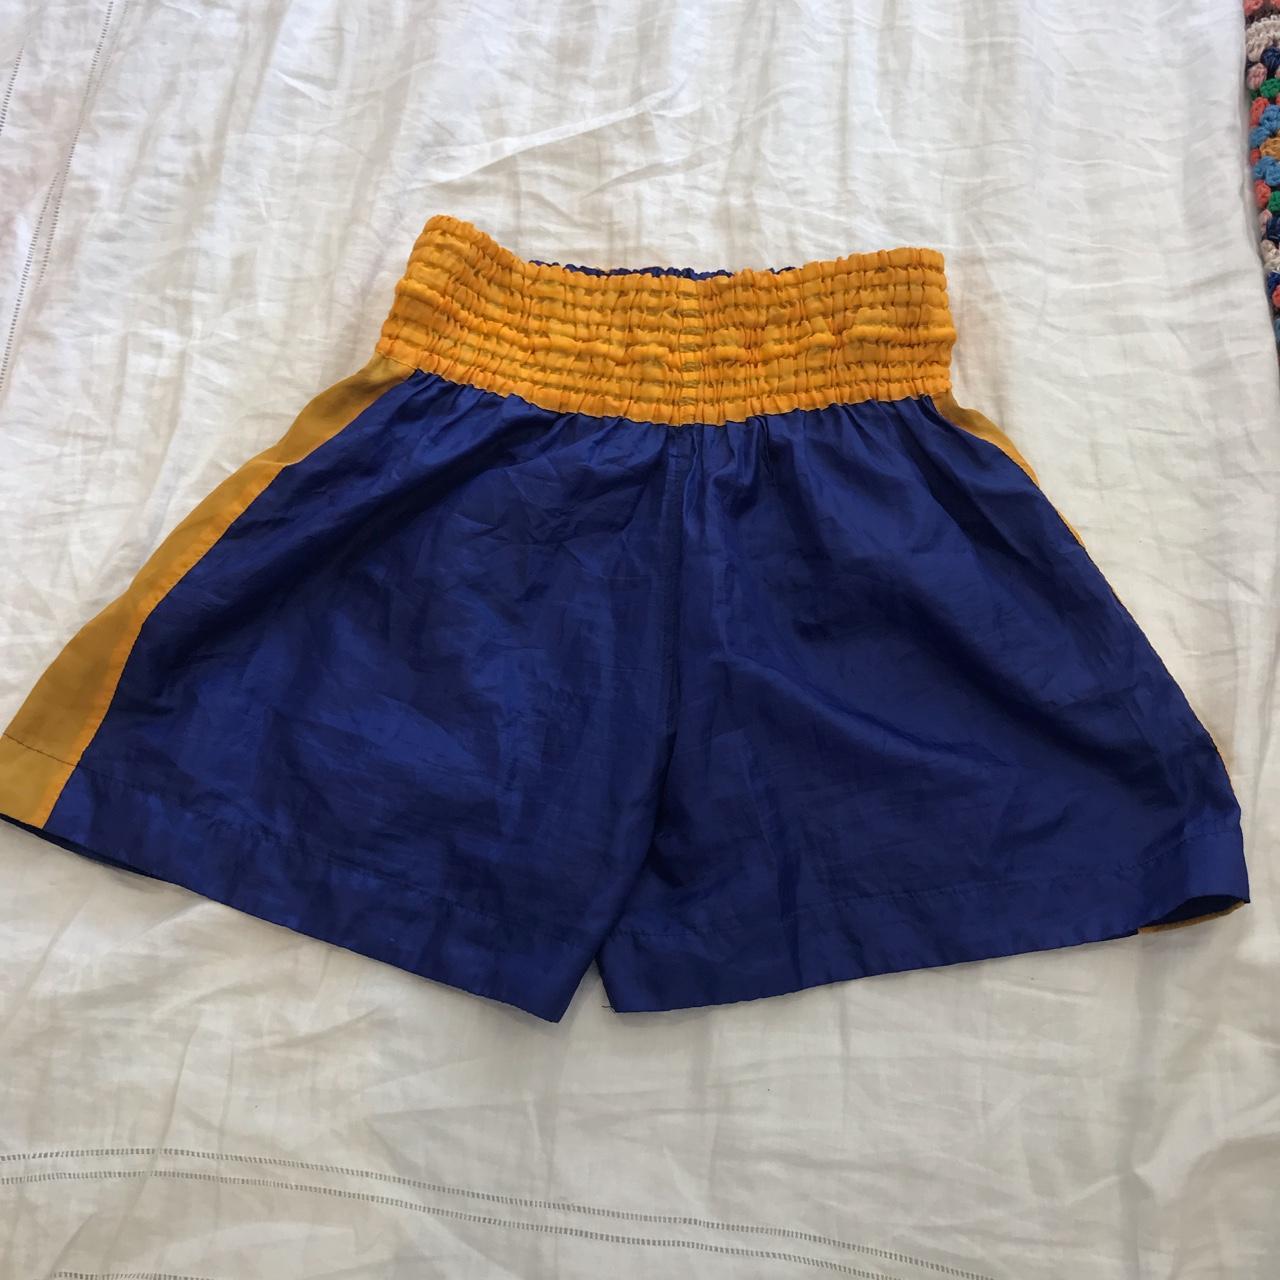 THAI BOXING SHORTS- Super comfy and light weight,... - Depop